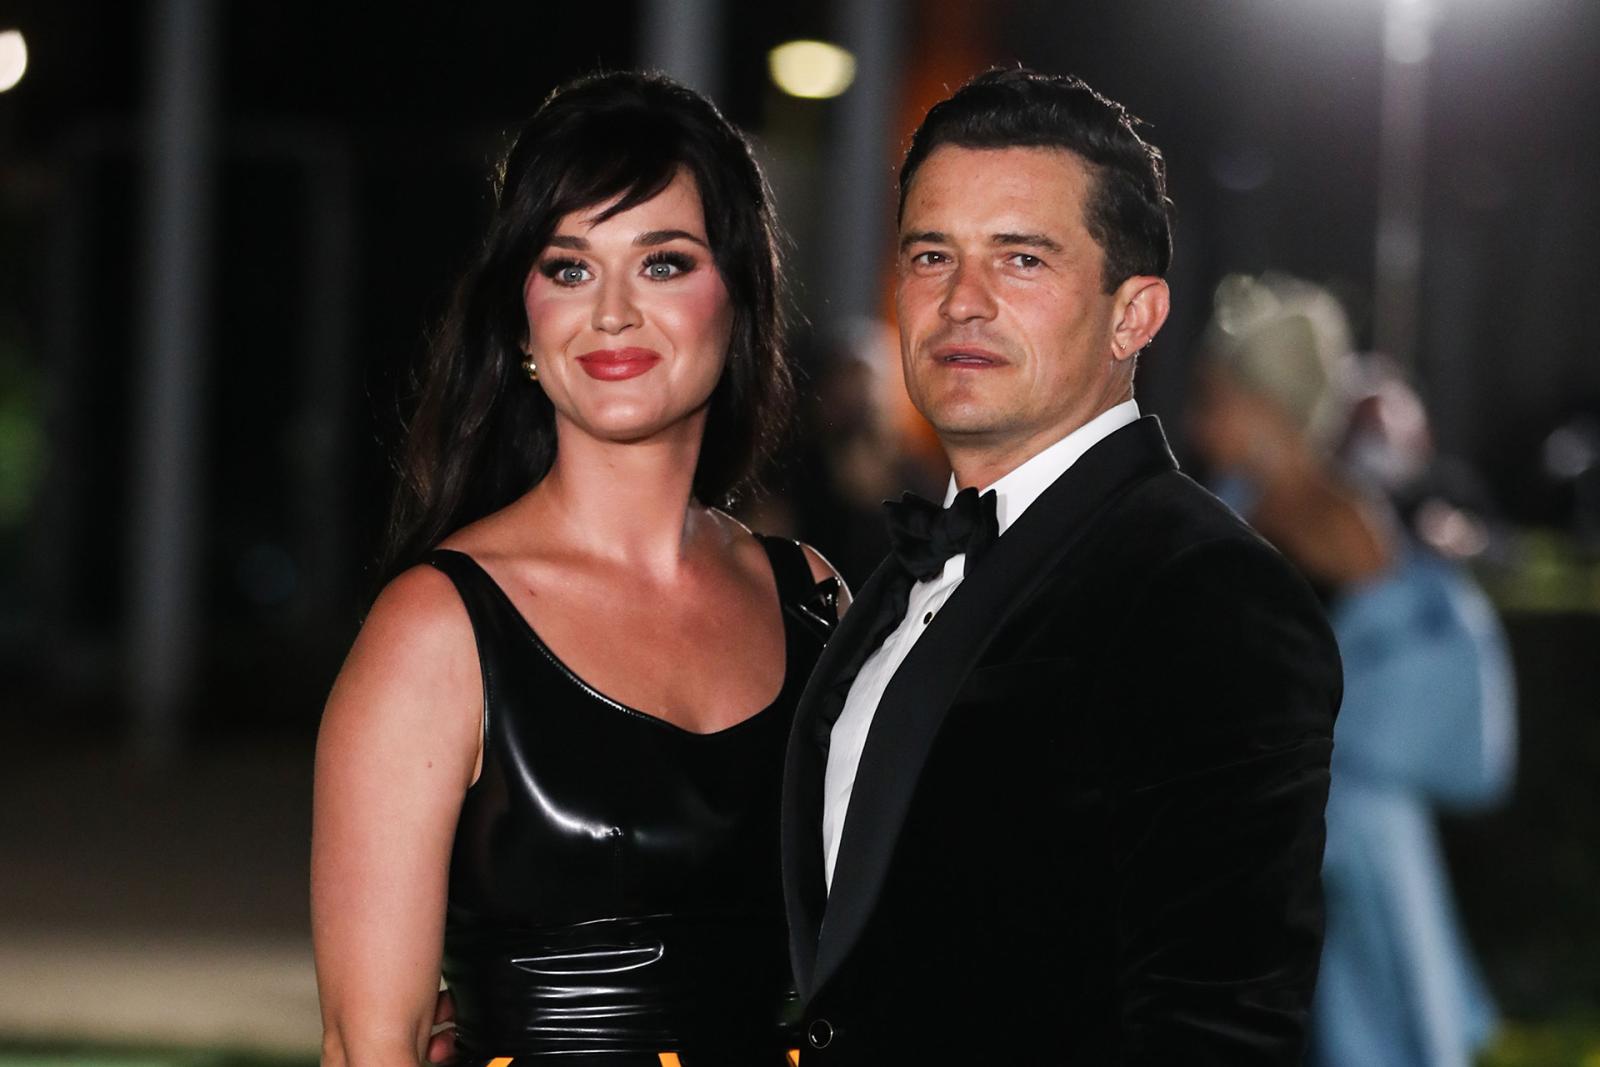 Say Yes to the Dress: 5 Celebrity Proposals That Will Make You Swoon - image 5